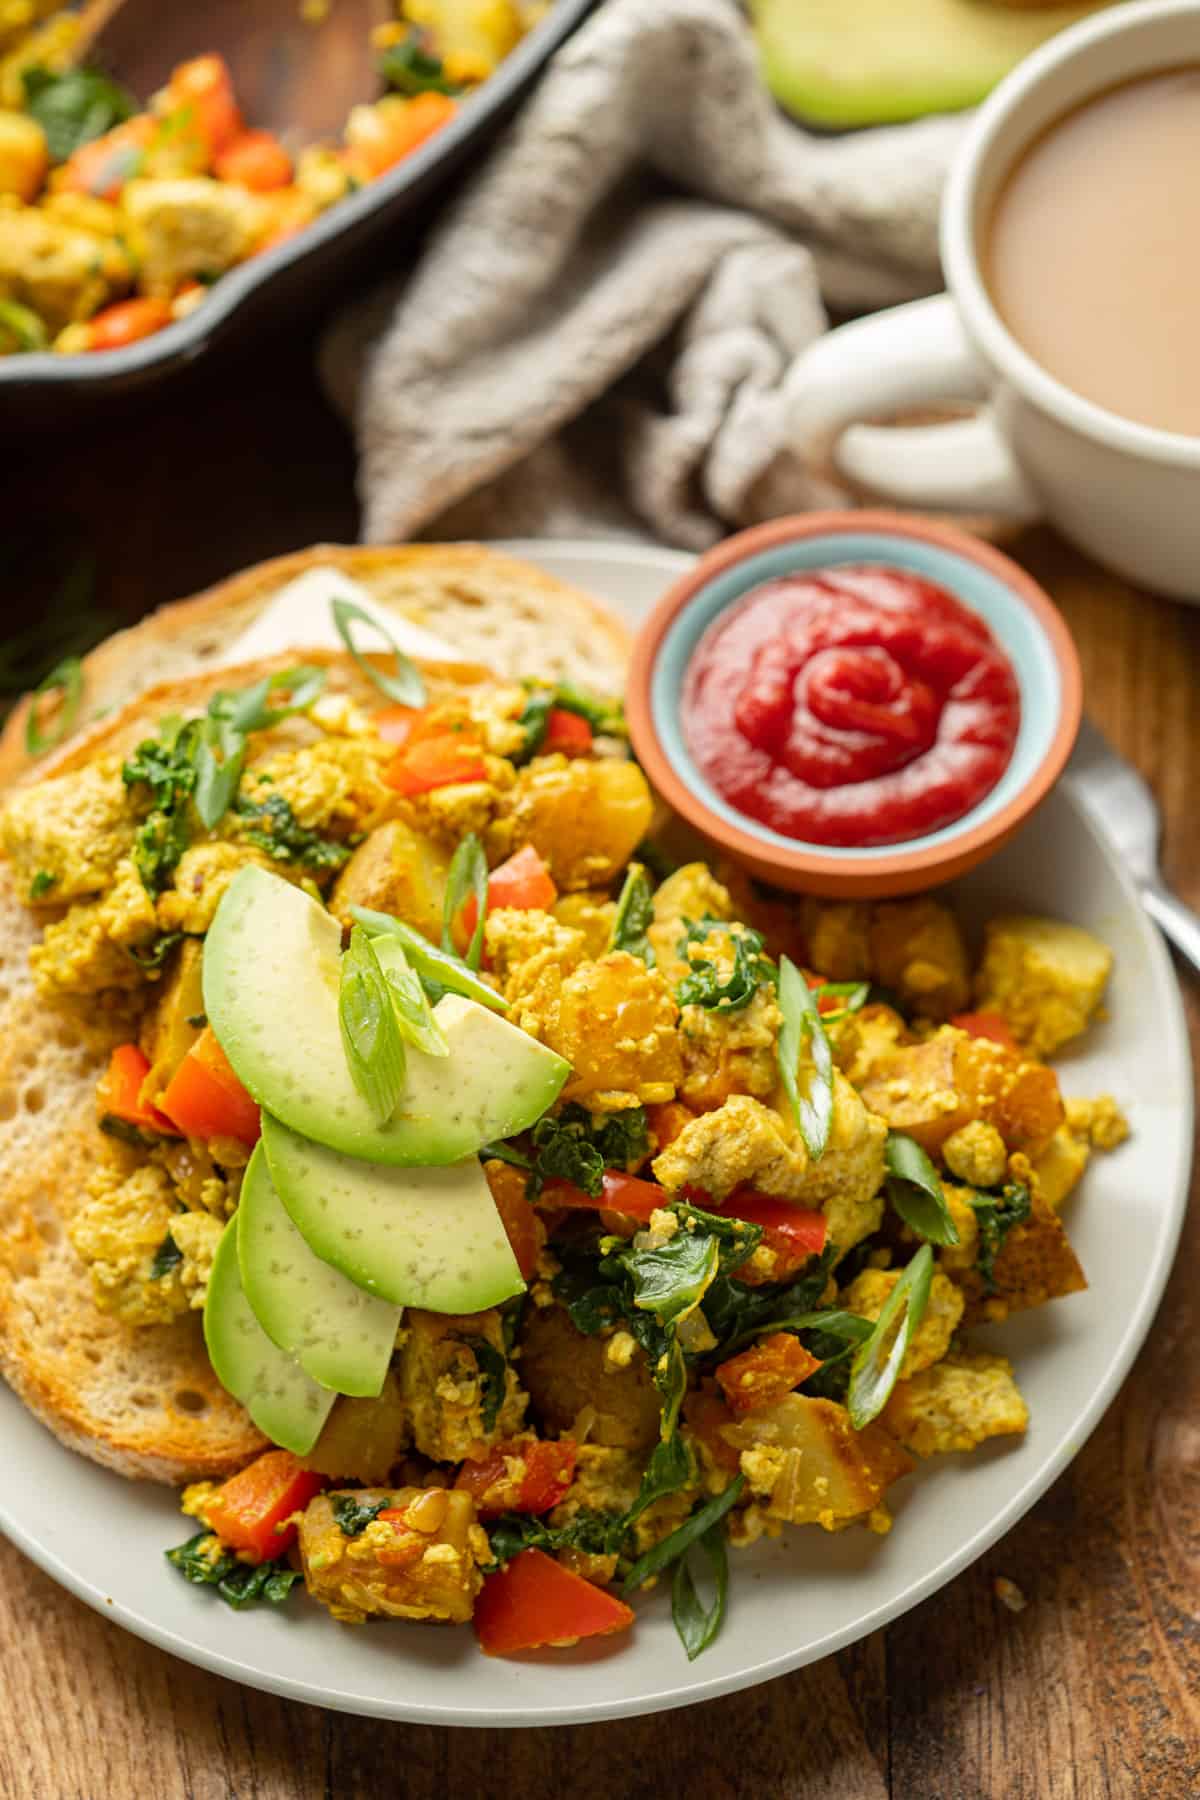 Plate of Tofu Scramble with skillet and coffee cup in the background.